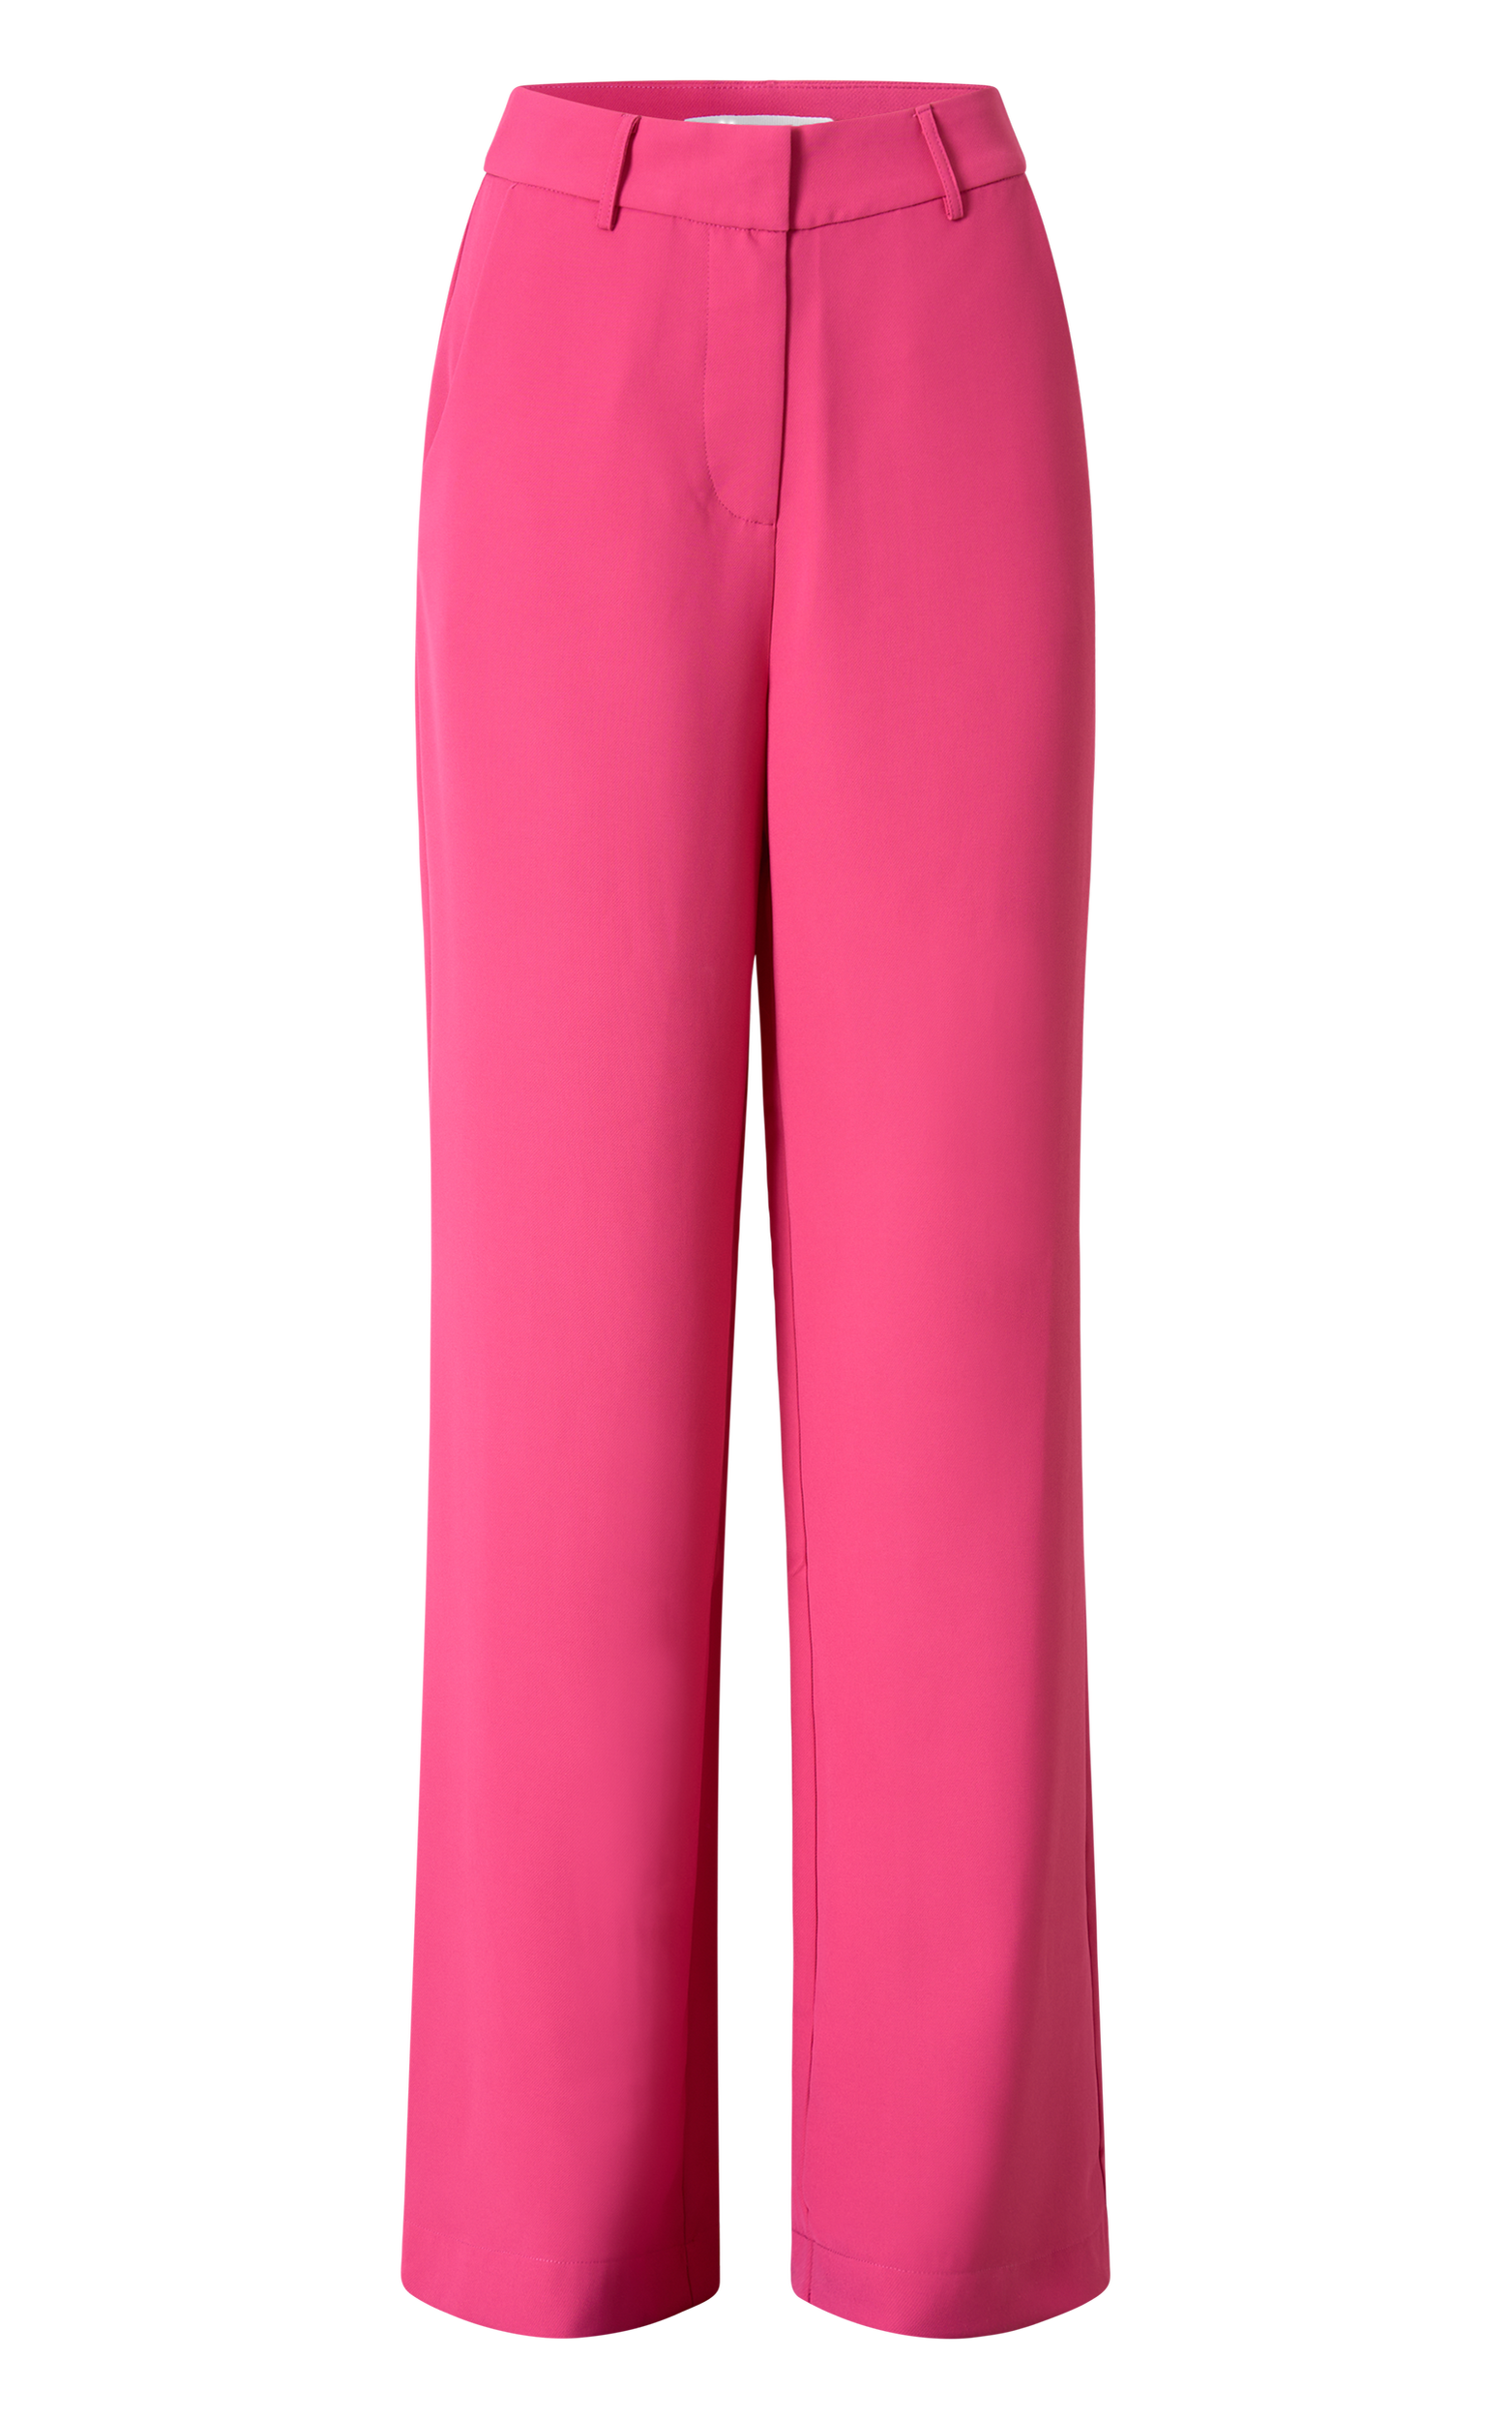 Hot Pink Pants Outfit  High Waist Hot Pink Aesthetic Slit Pants